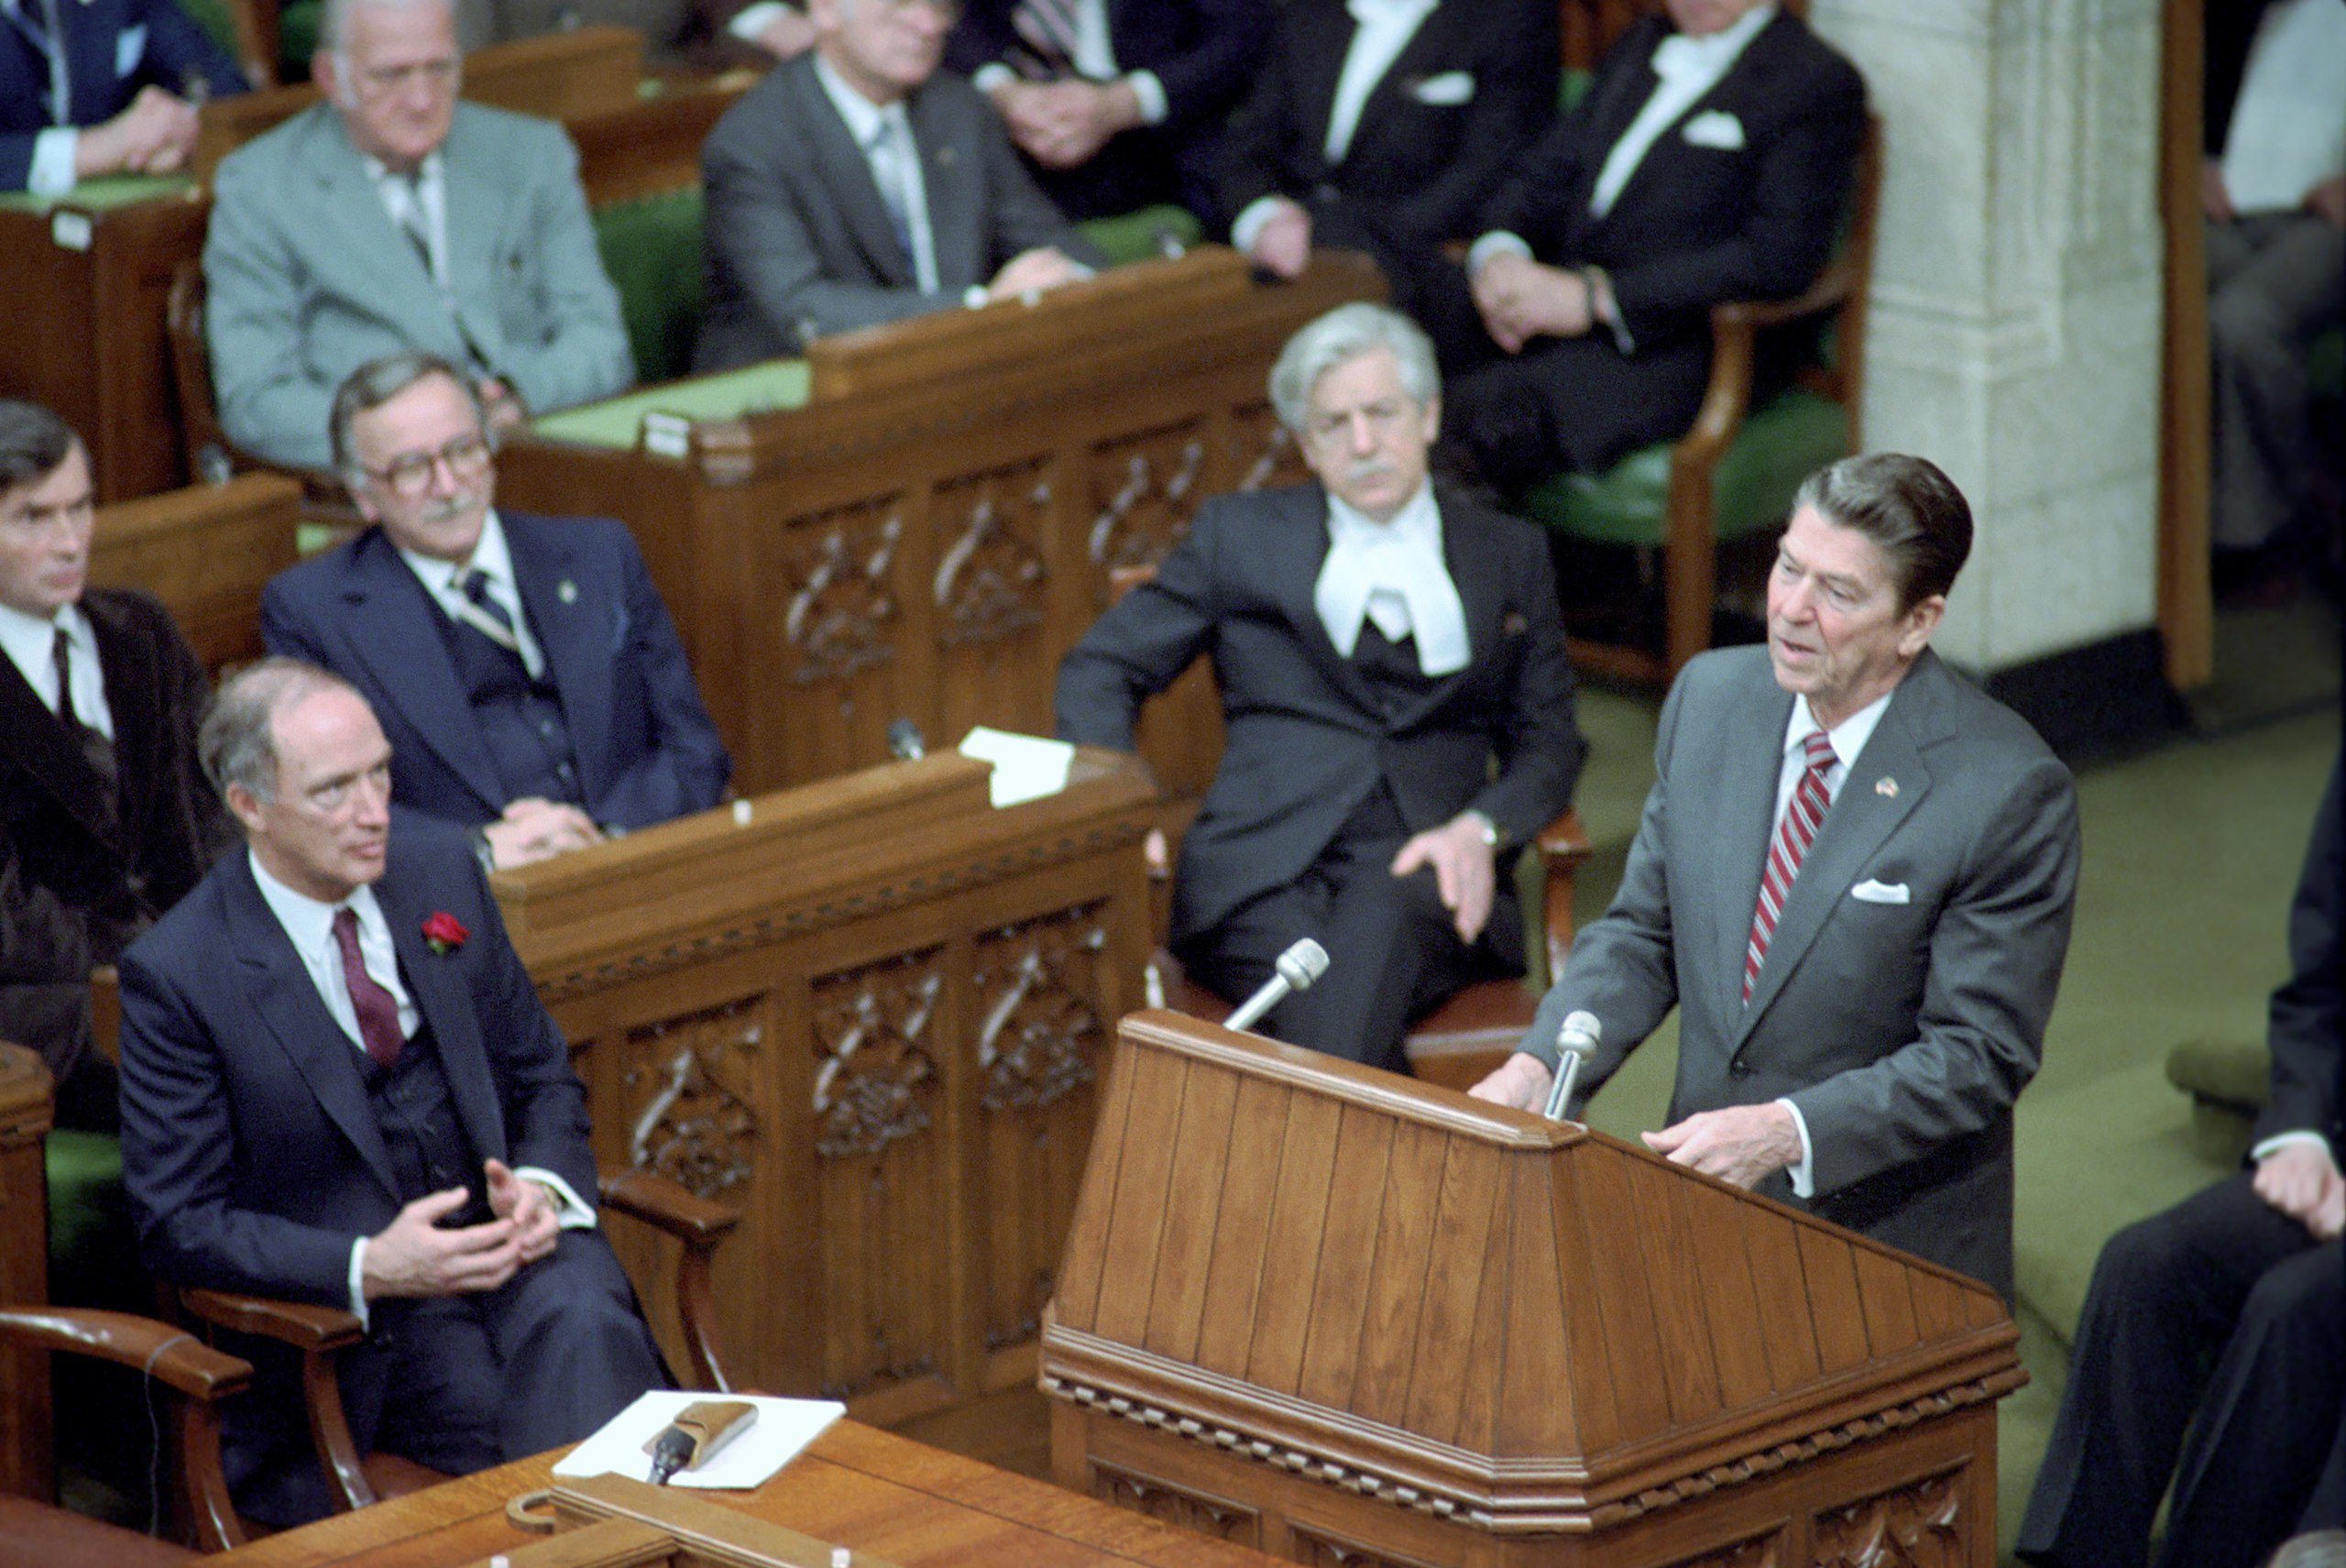 President_Ronald_Reagan_speaking_at_podium_while_addressing_members_of_the_House_of_Commons_during_trip_to_Canada